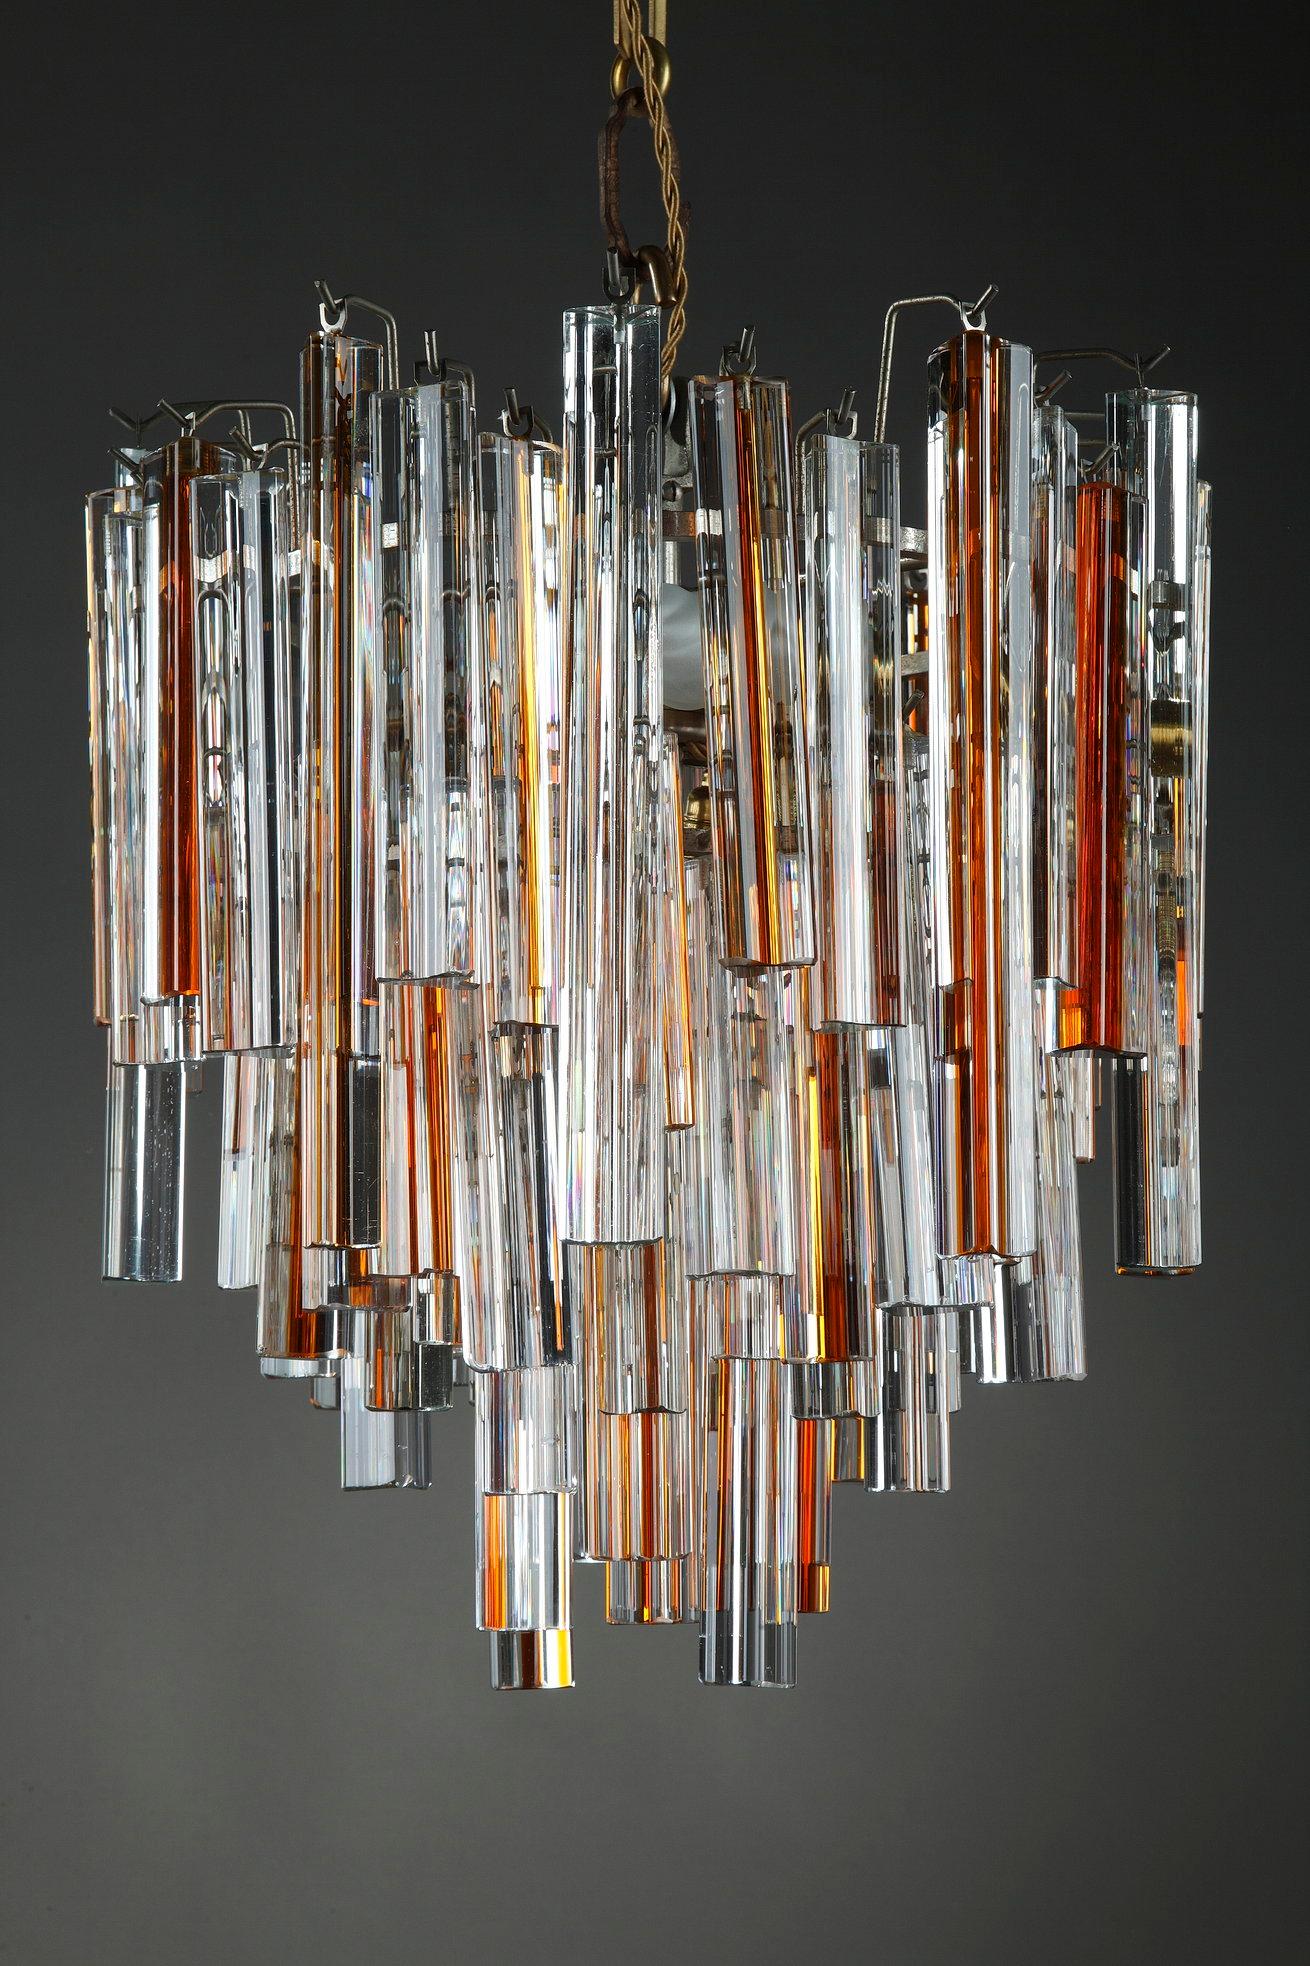 Inverted pyramidal chandelier composed of Murano glass pendants of triangular section translucent and with orange nets. The pendants are beveled at their ends. The central frame is made of chromed metal. The chandelier works with 4 lightbulbs.